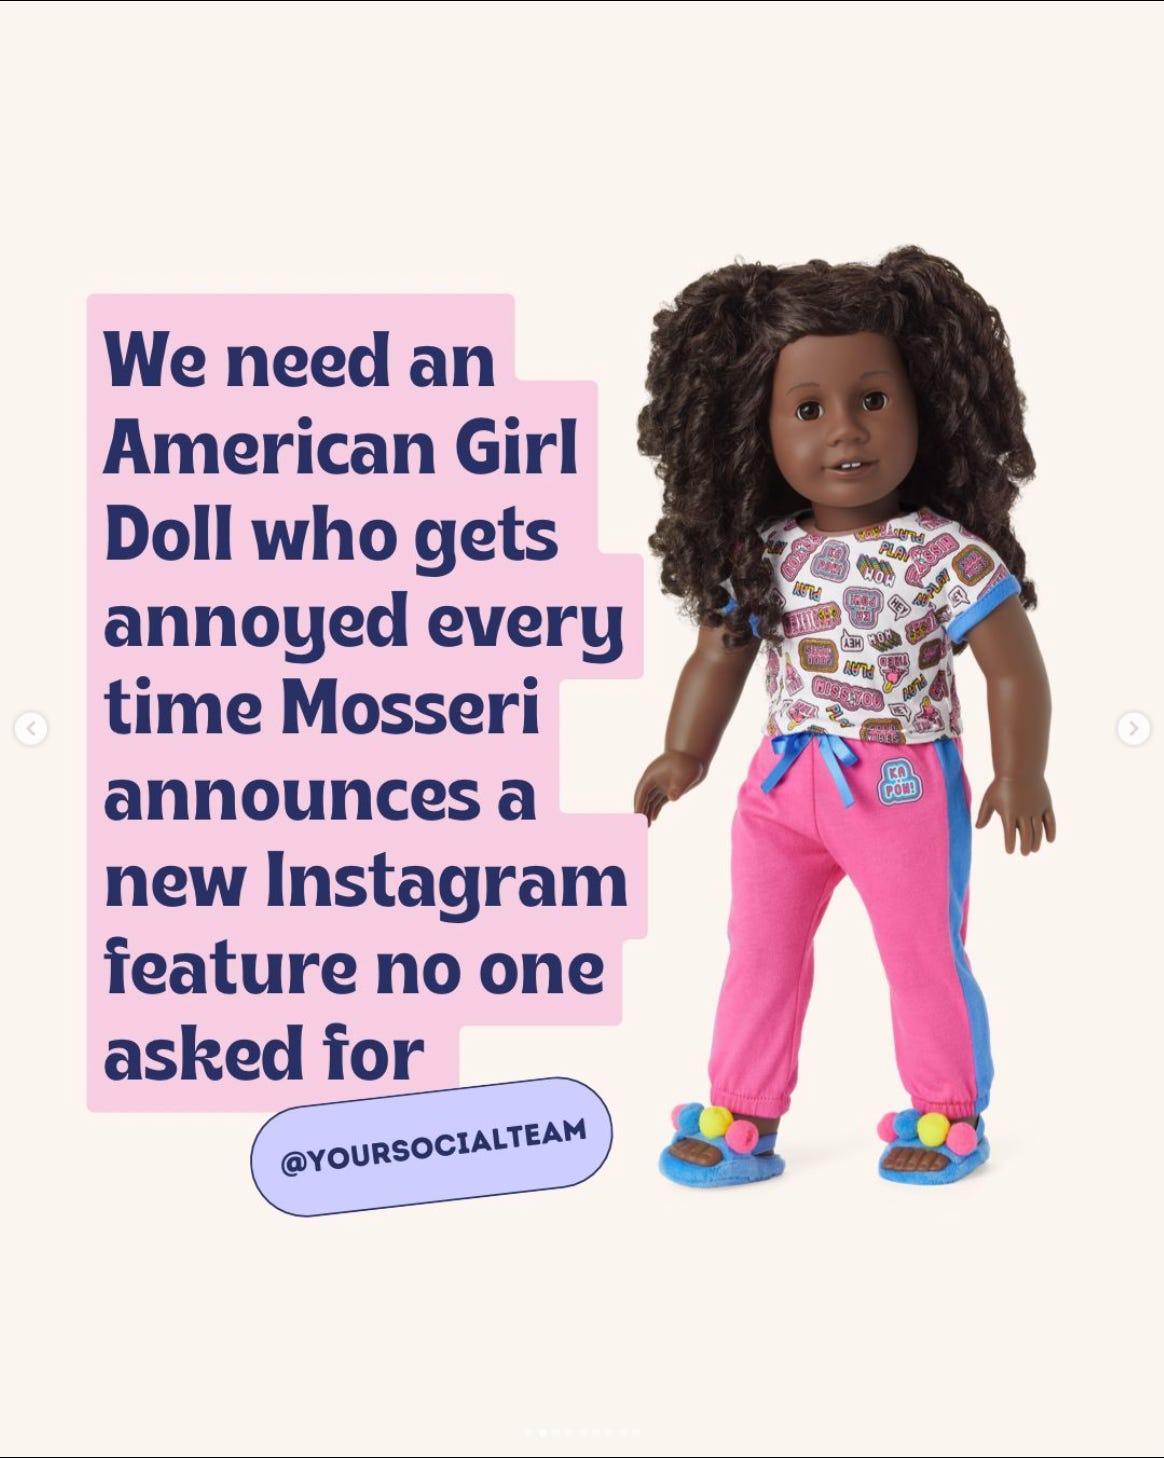 American Doll meme: We need an American Girl Doll who gets annoyed every time Mosseri announces a new Instagram feature no one asked for